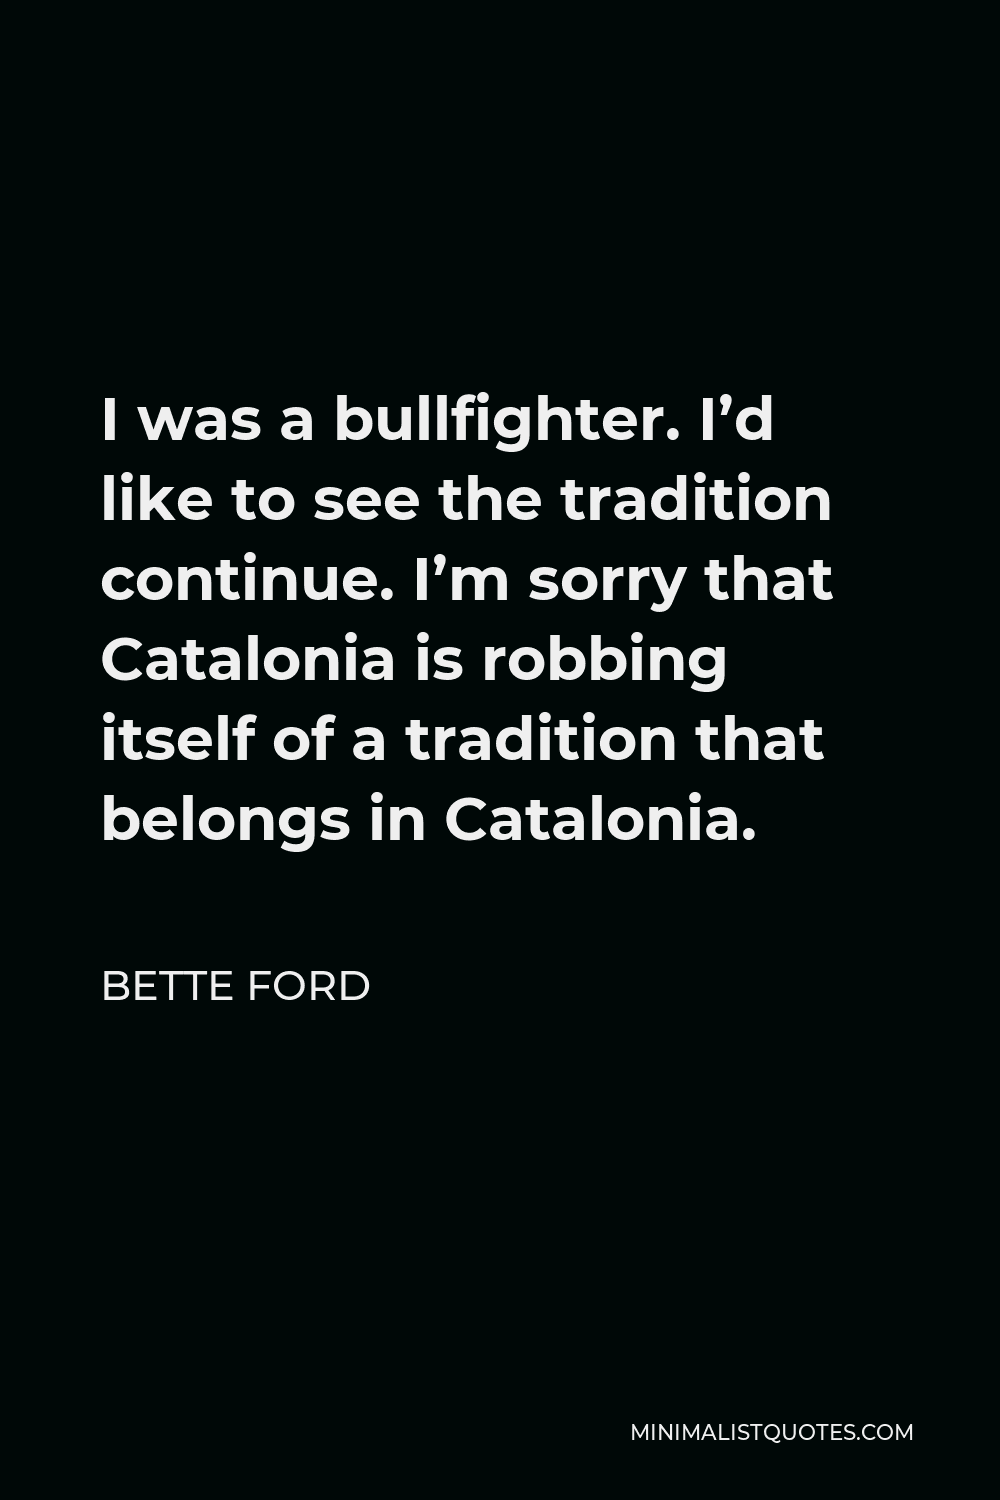 Bette Ford Quote - I was a bullfighter. I’d like to see the tradition continue. I’m sorry that Catalonia is robbing itself of a tradition that belongs in Catalonia.